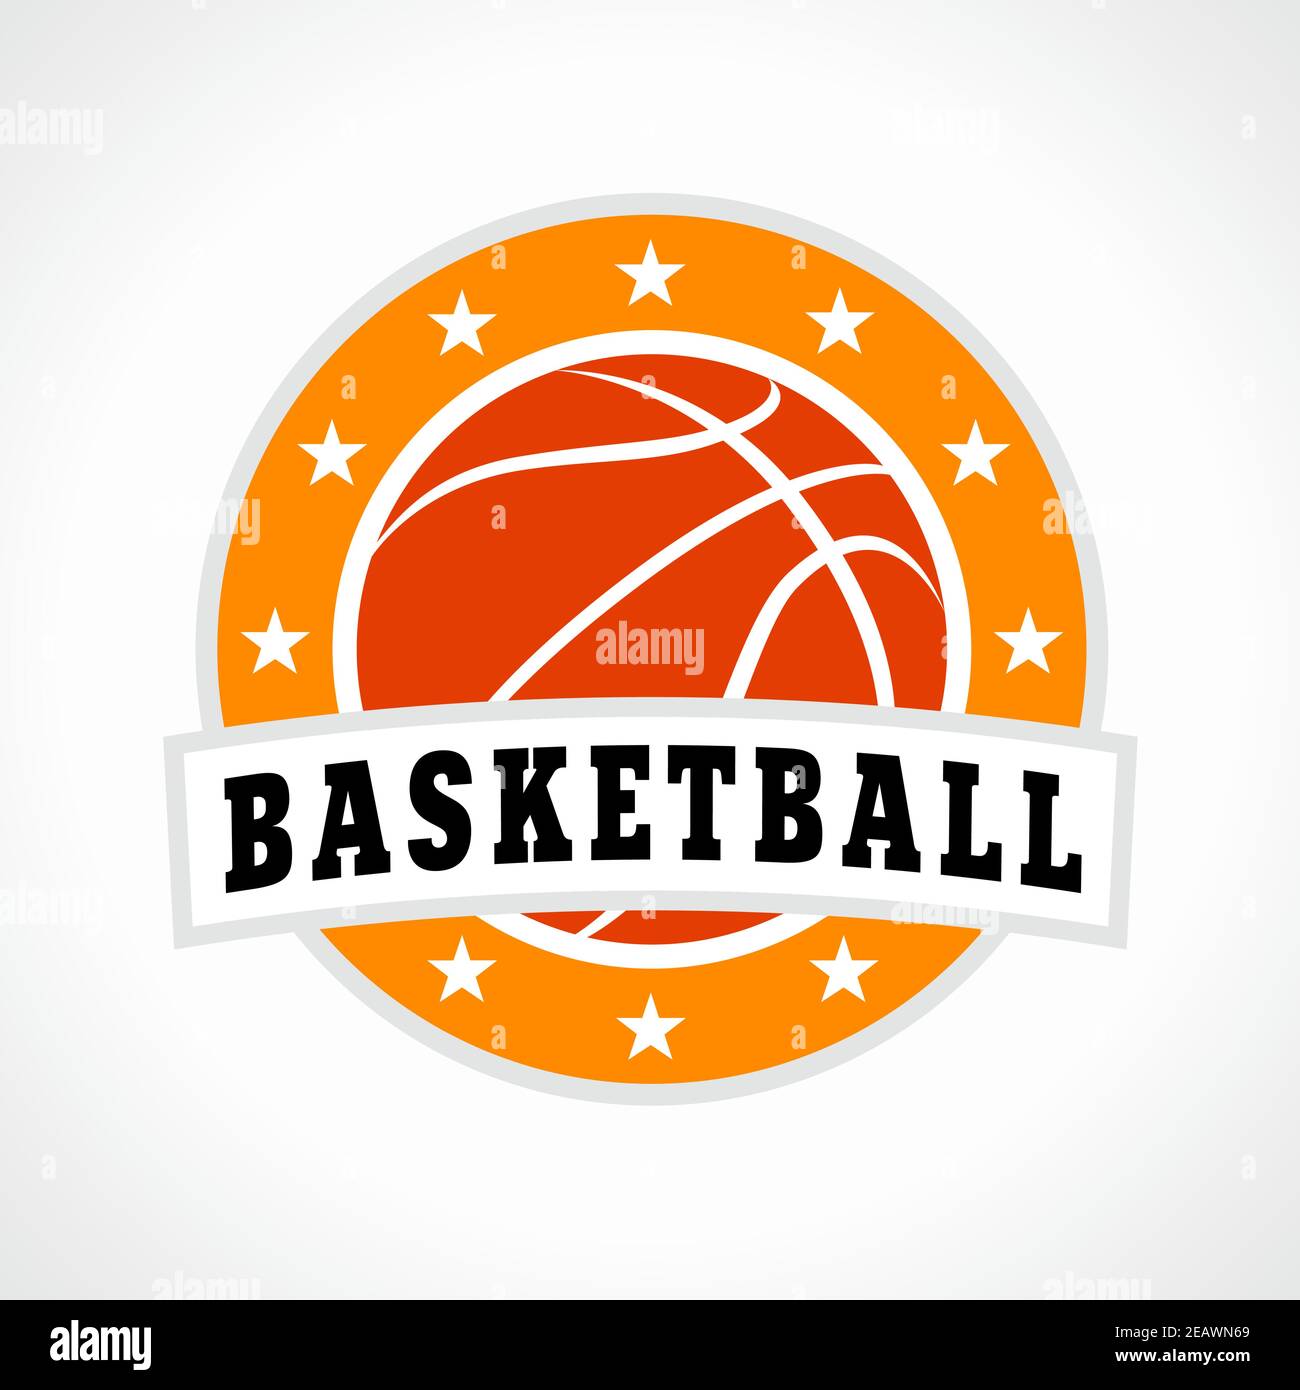 Basketball vector logo. Ball, sportsman cup sign. Brand symbol of national competitions, mobile app icon, sport equipment shop. Creative red award med Stock Vector